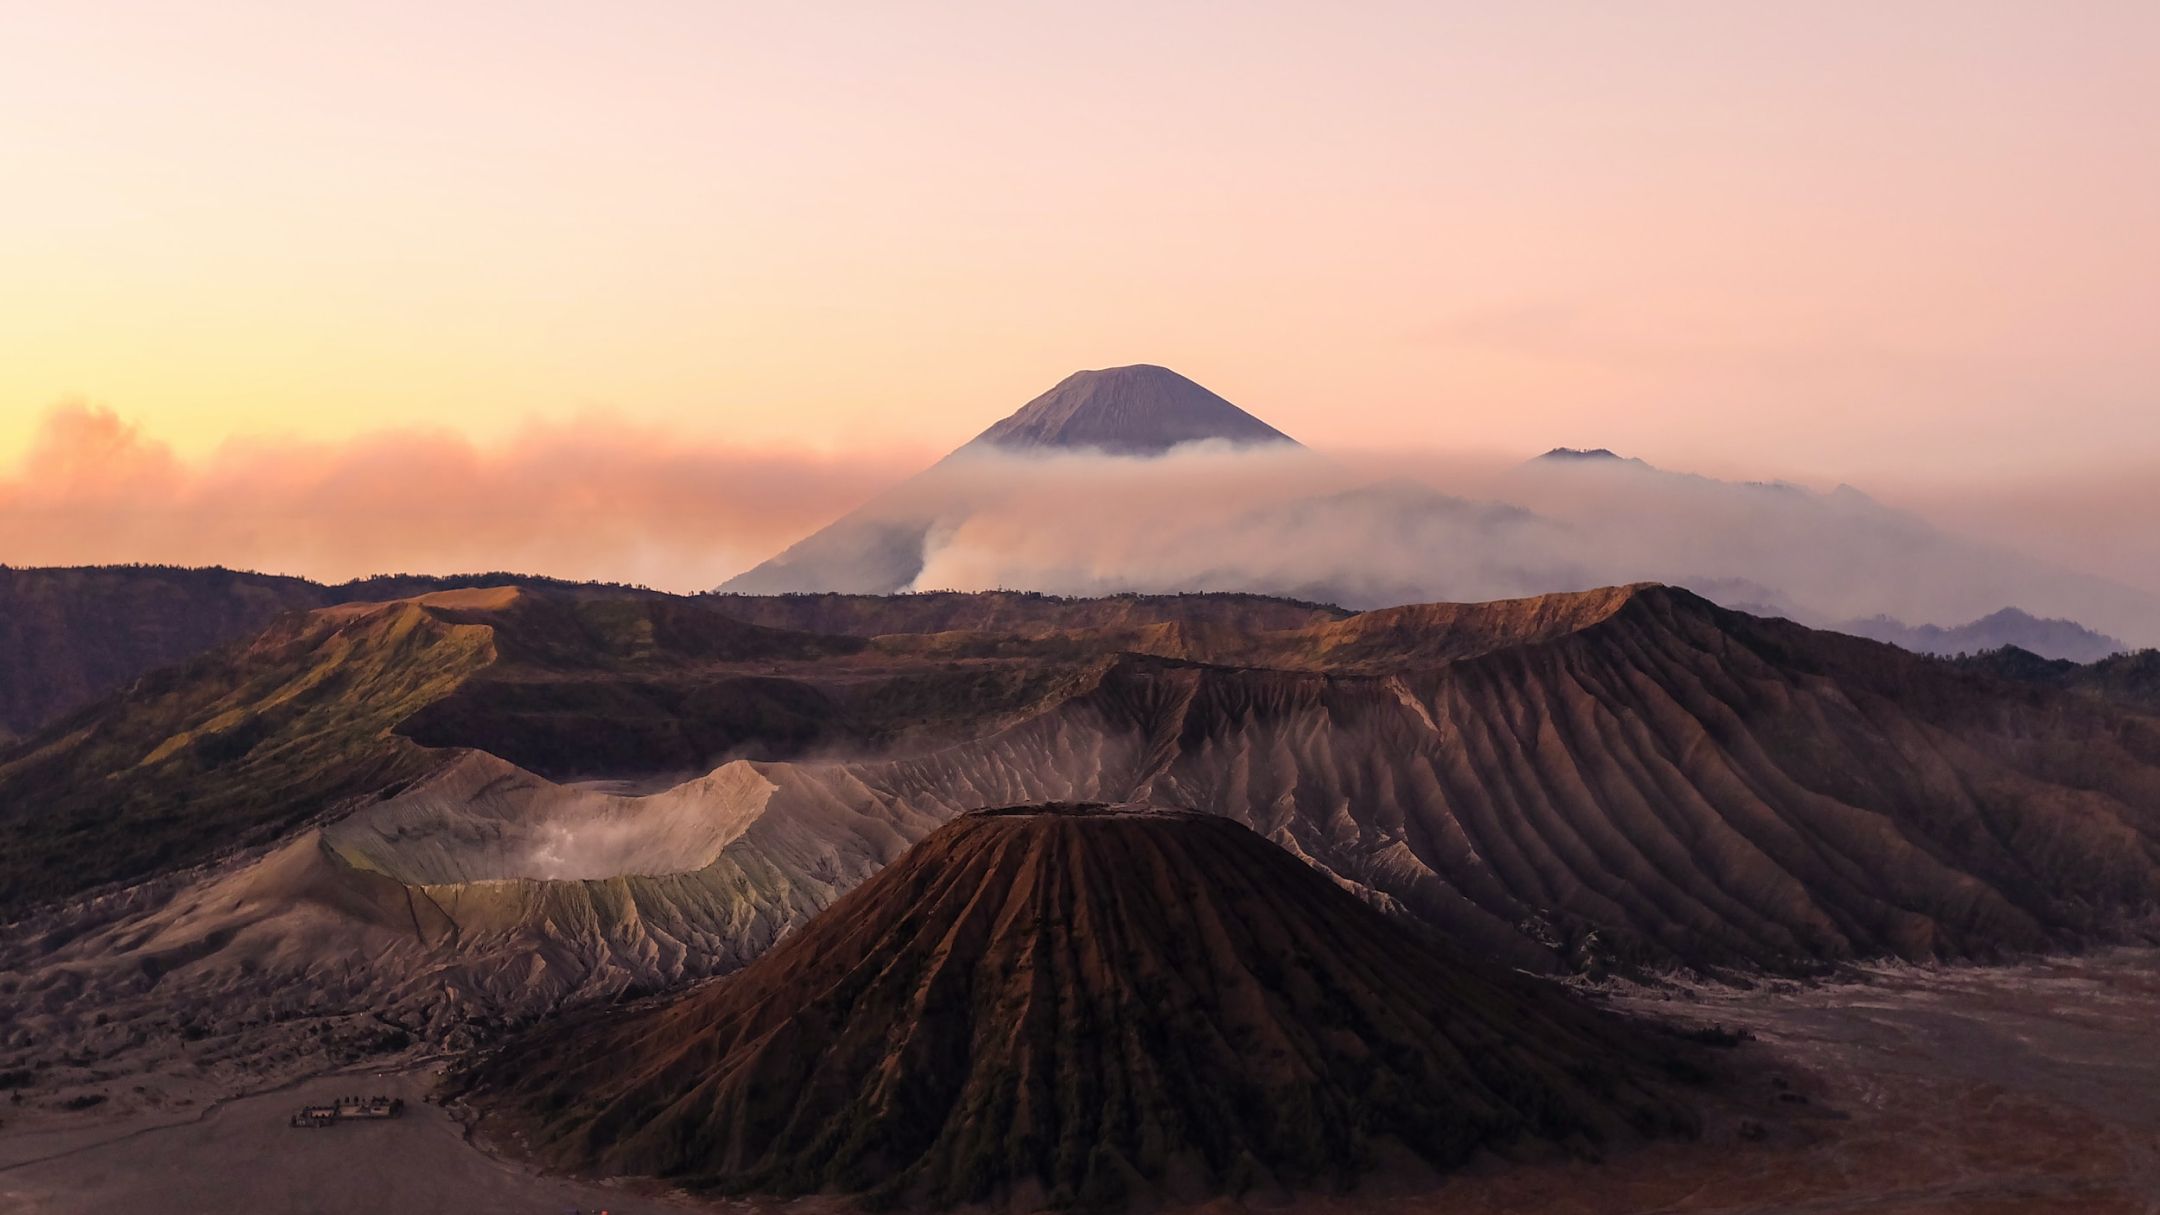 Volcanic landscape in Indonesia, rocky volcanoes surrounded by misty clouds against a sunset sky.